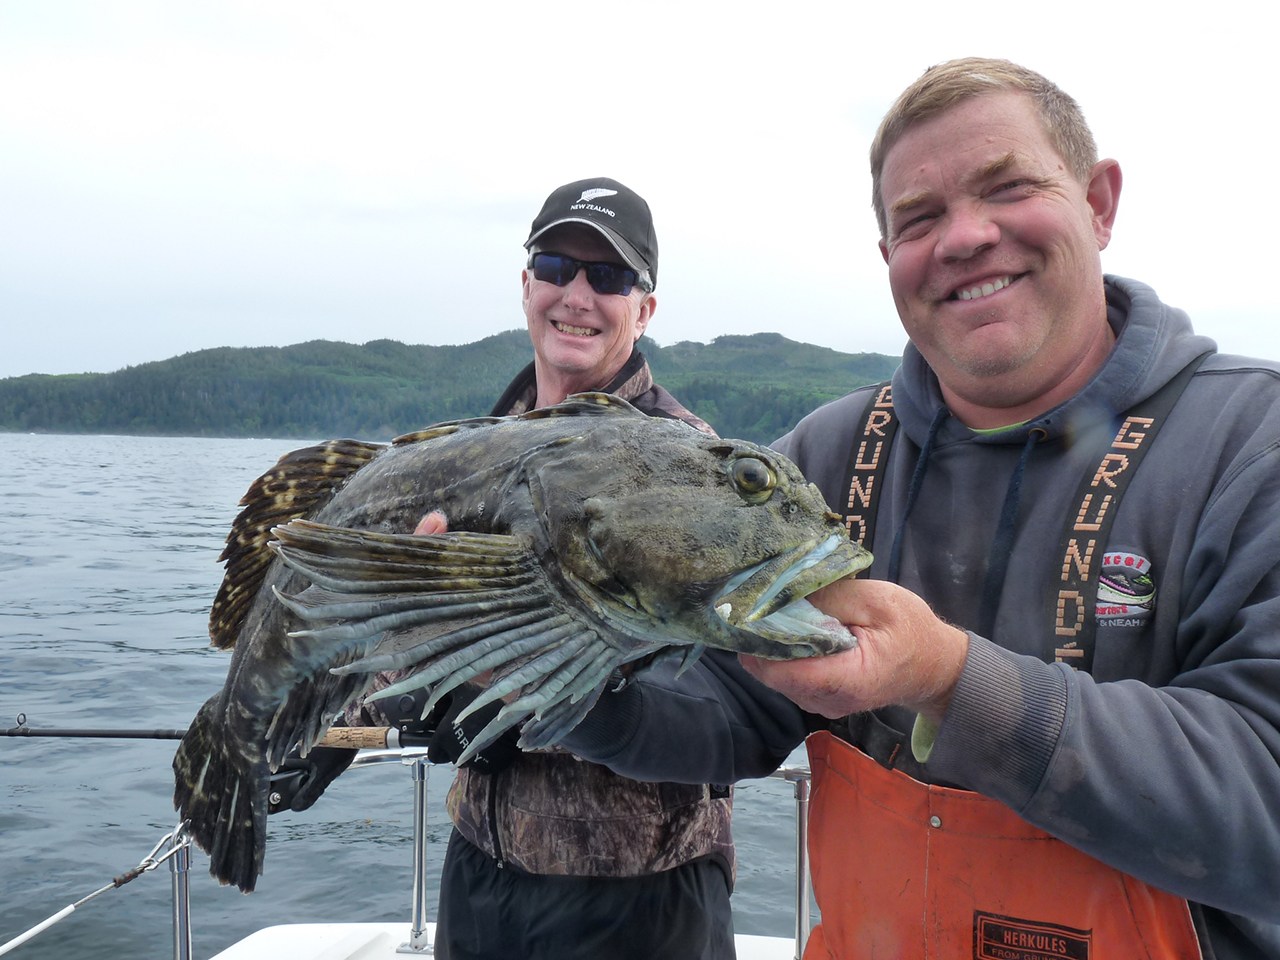 Puget Sound Anglers Puget Sound Anglers member Bob Keck, left, and Excel Charters captain Tom Burlingame display a cabezon caught during a recent fishing trip. Burlingame will speak at Thursday’s Puget Sound Anglers meeting in Sequim.